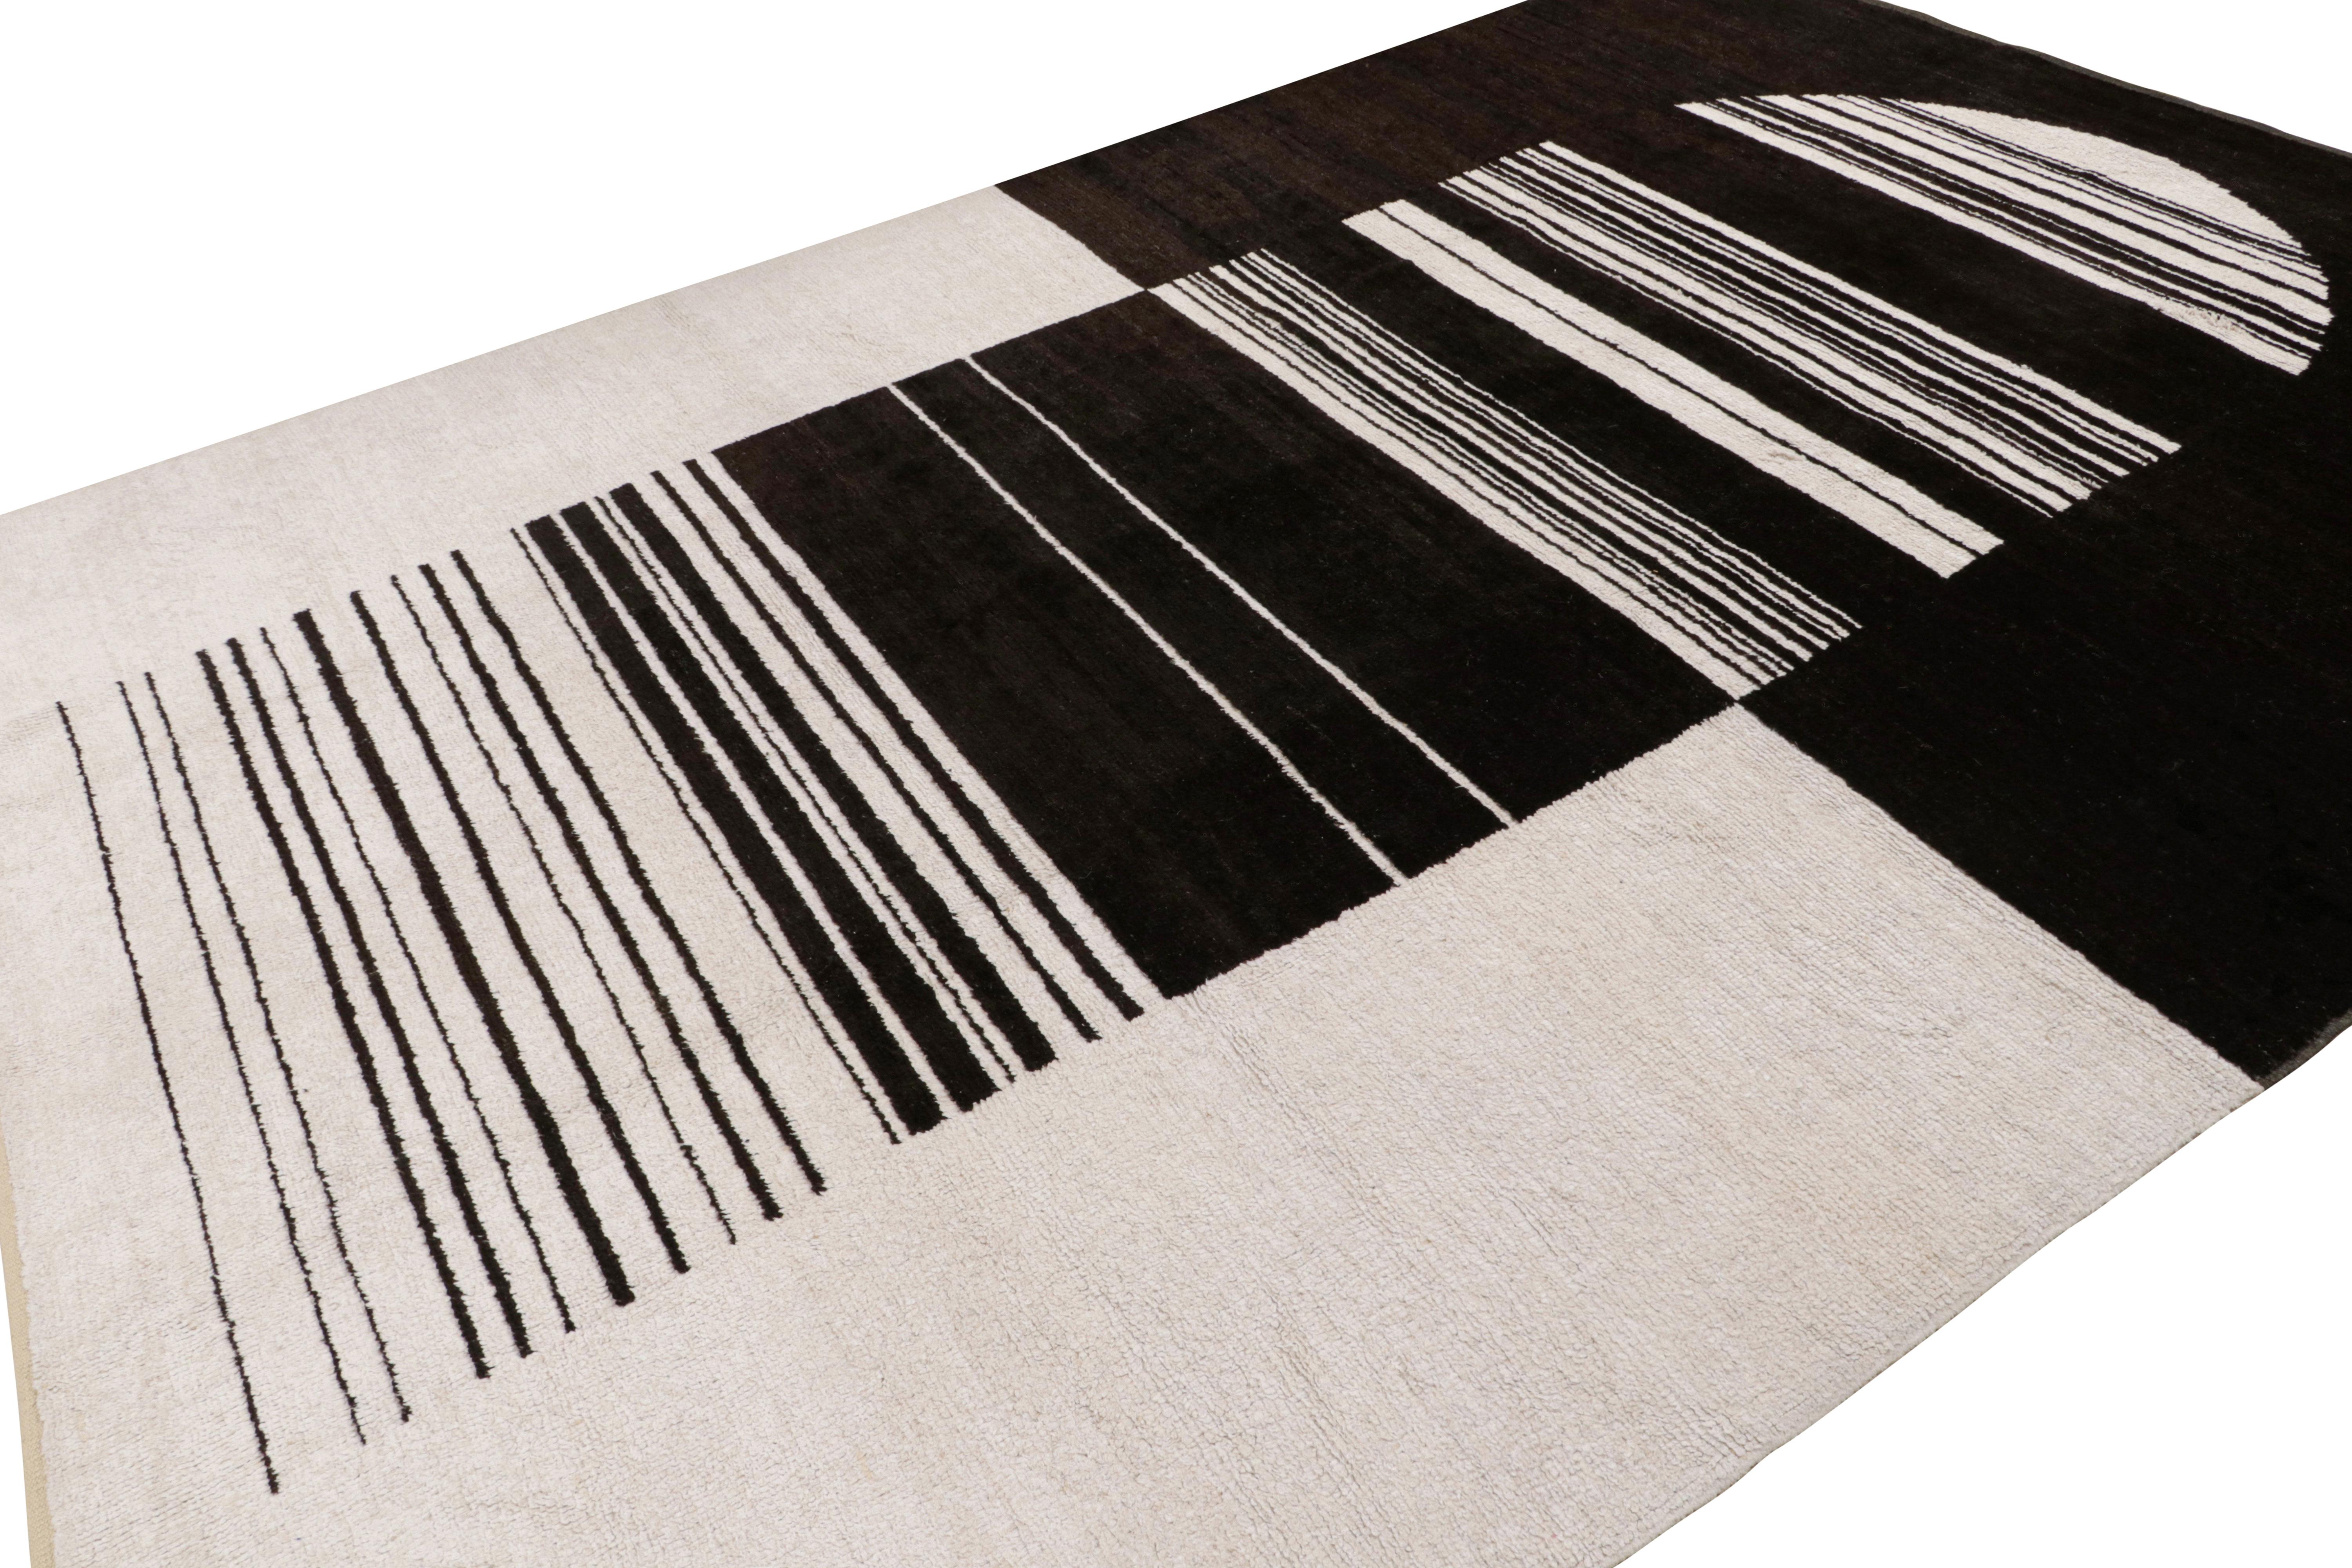 Hand knotted in wool, this 9x13 contemporary rug “Gateway to Heaven” features a design that plays abstract minimalist and Bauhaus moods.

On the Design:

This design features a play of geometric patterns and gradation in white and black tones that